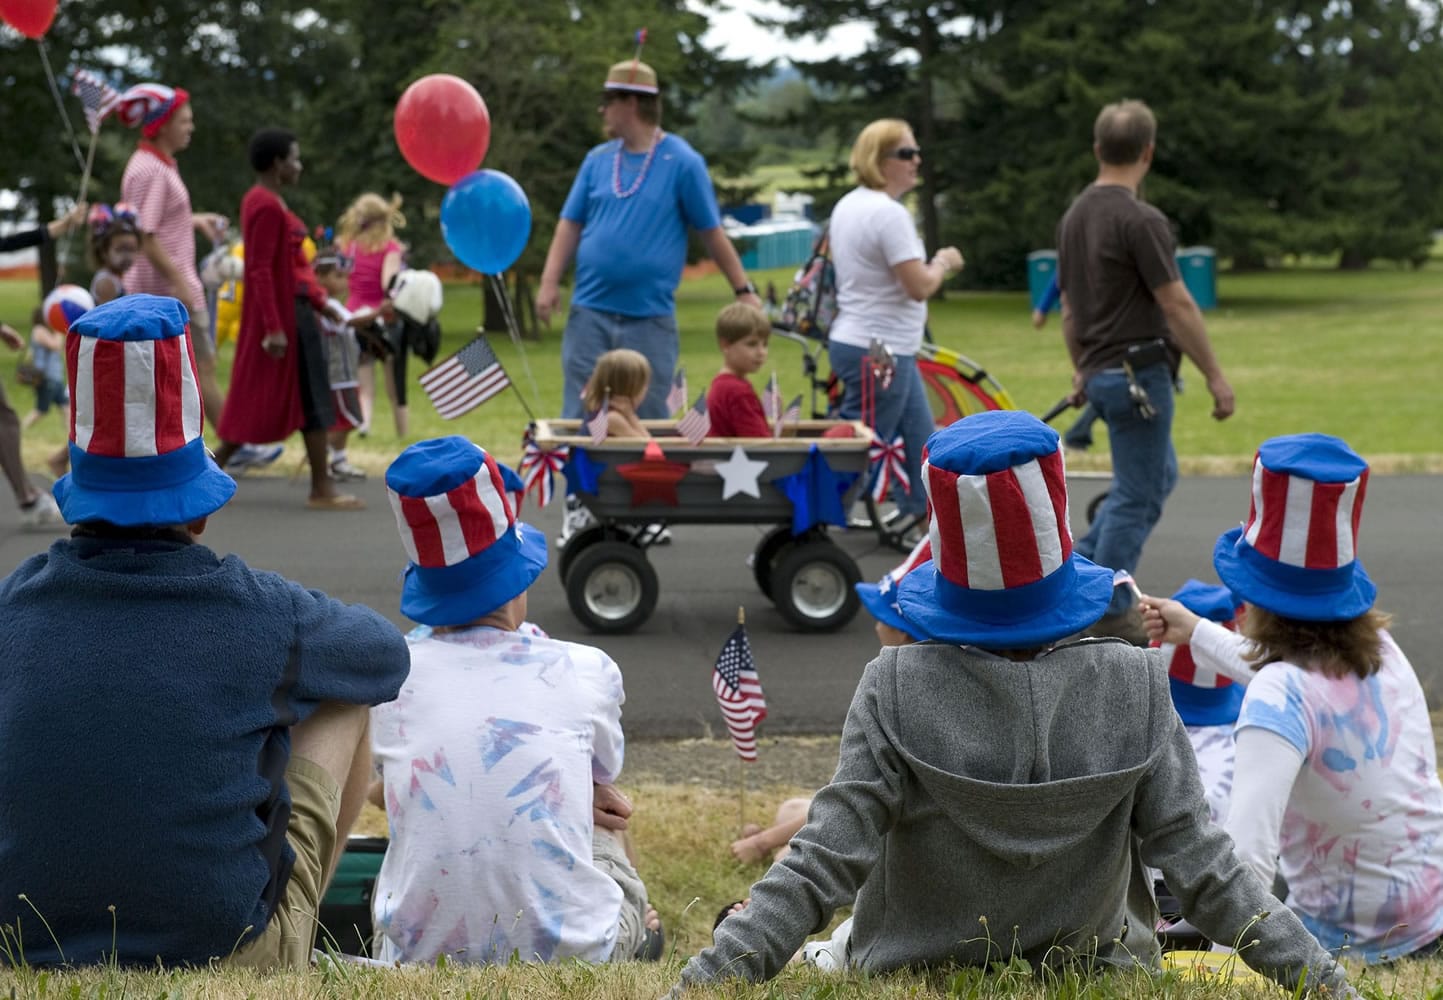 The children's patriotic parade is among the activities added to Vancouver's annual Fourth of July celebration, as organizers try to make it a more family-friendly event that also lessens the impact of July 4 on Hudson's Bay neighborhood residents.